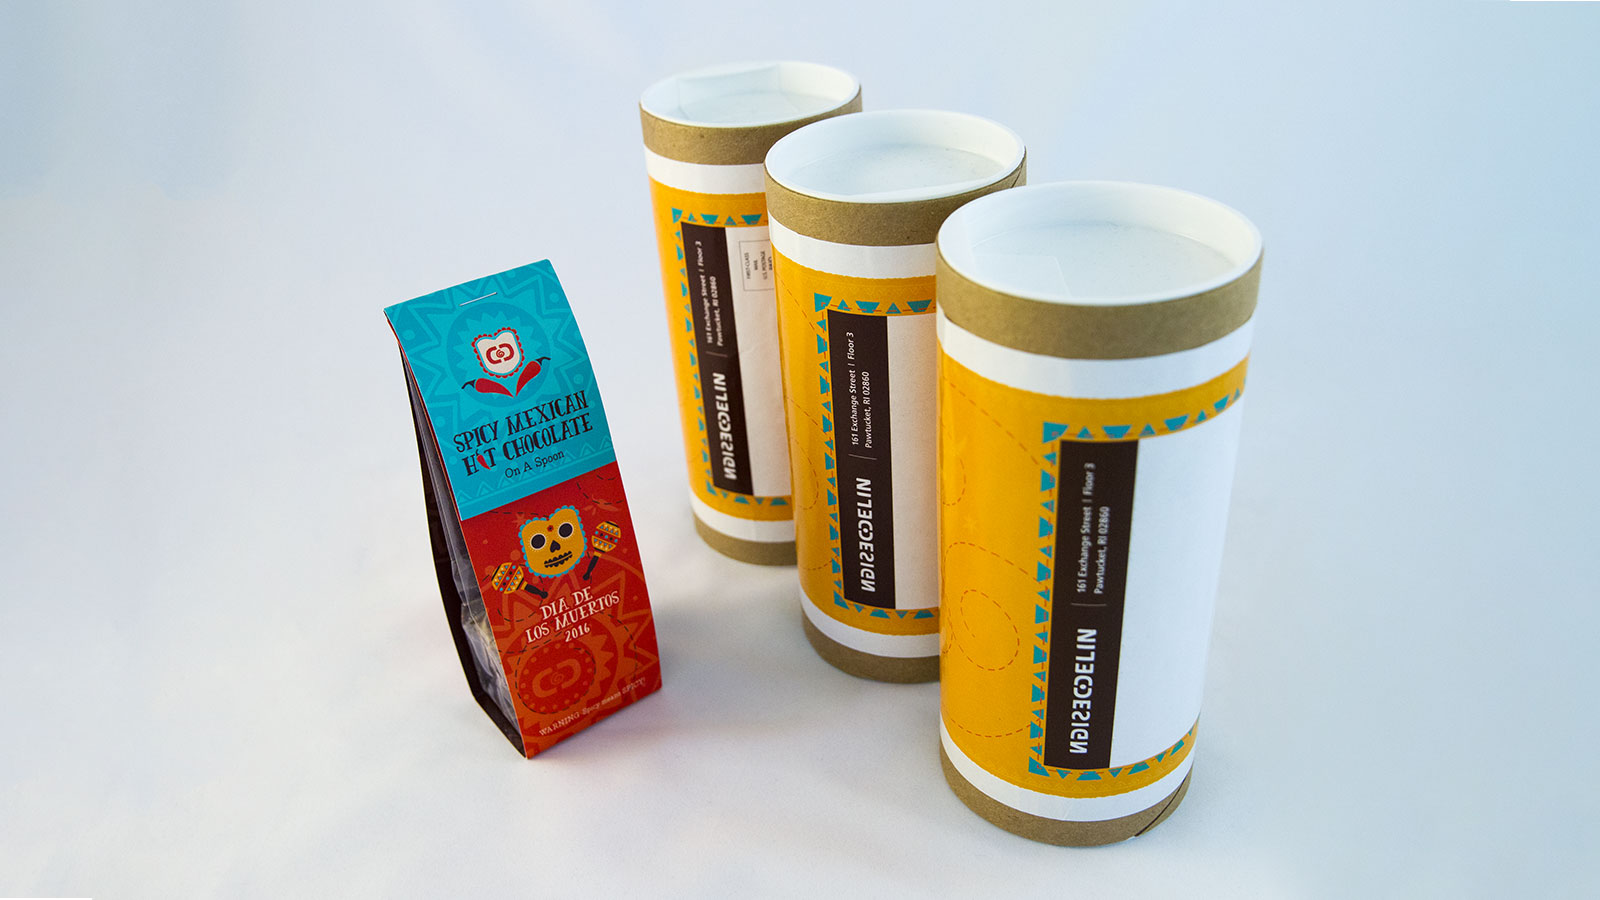 Spicy Mexican Hot Chocolate Promotion – Complete Packaging